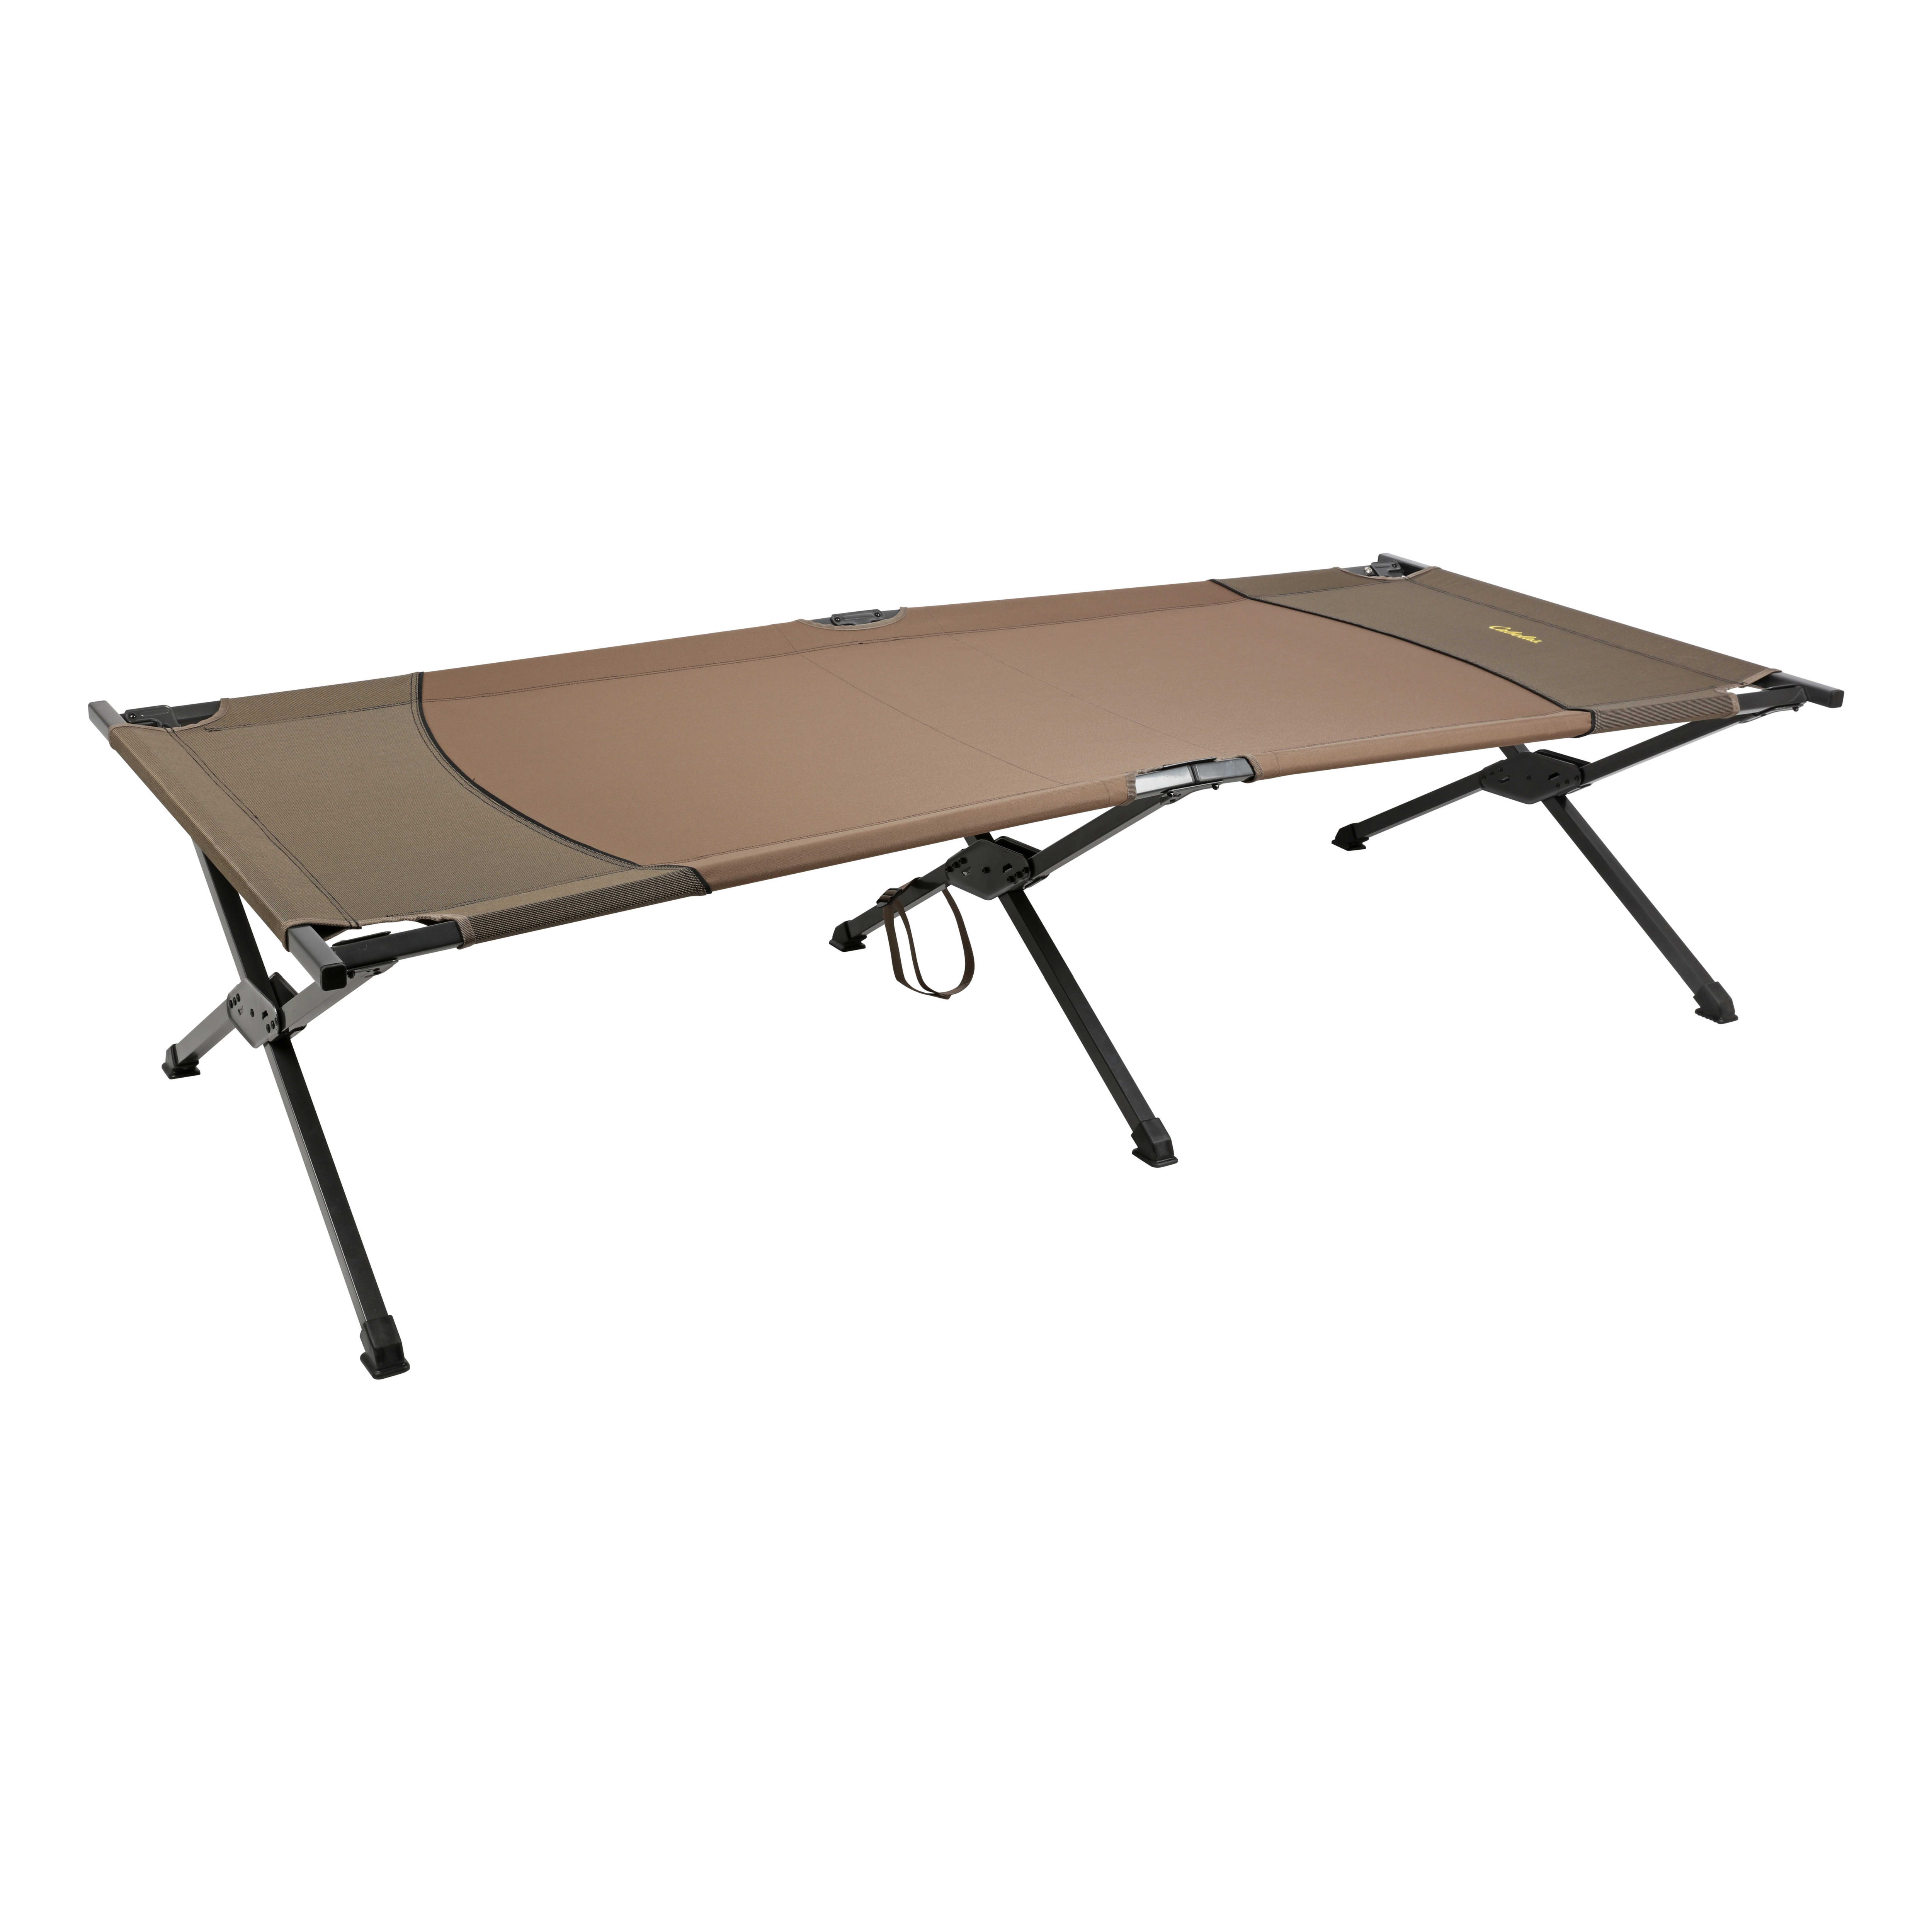 Cabela's AGM Cot with Lever Arm 